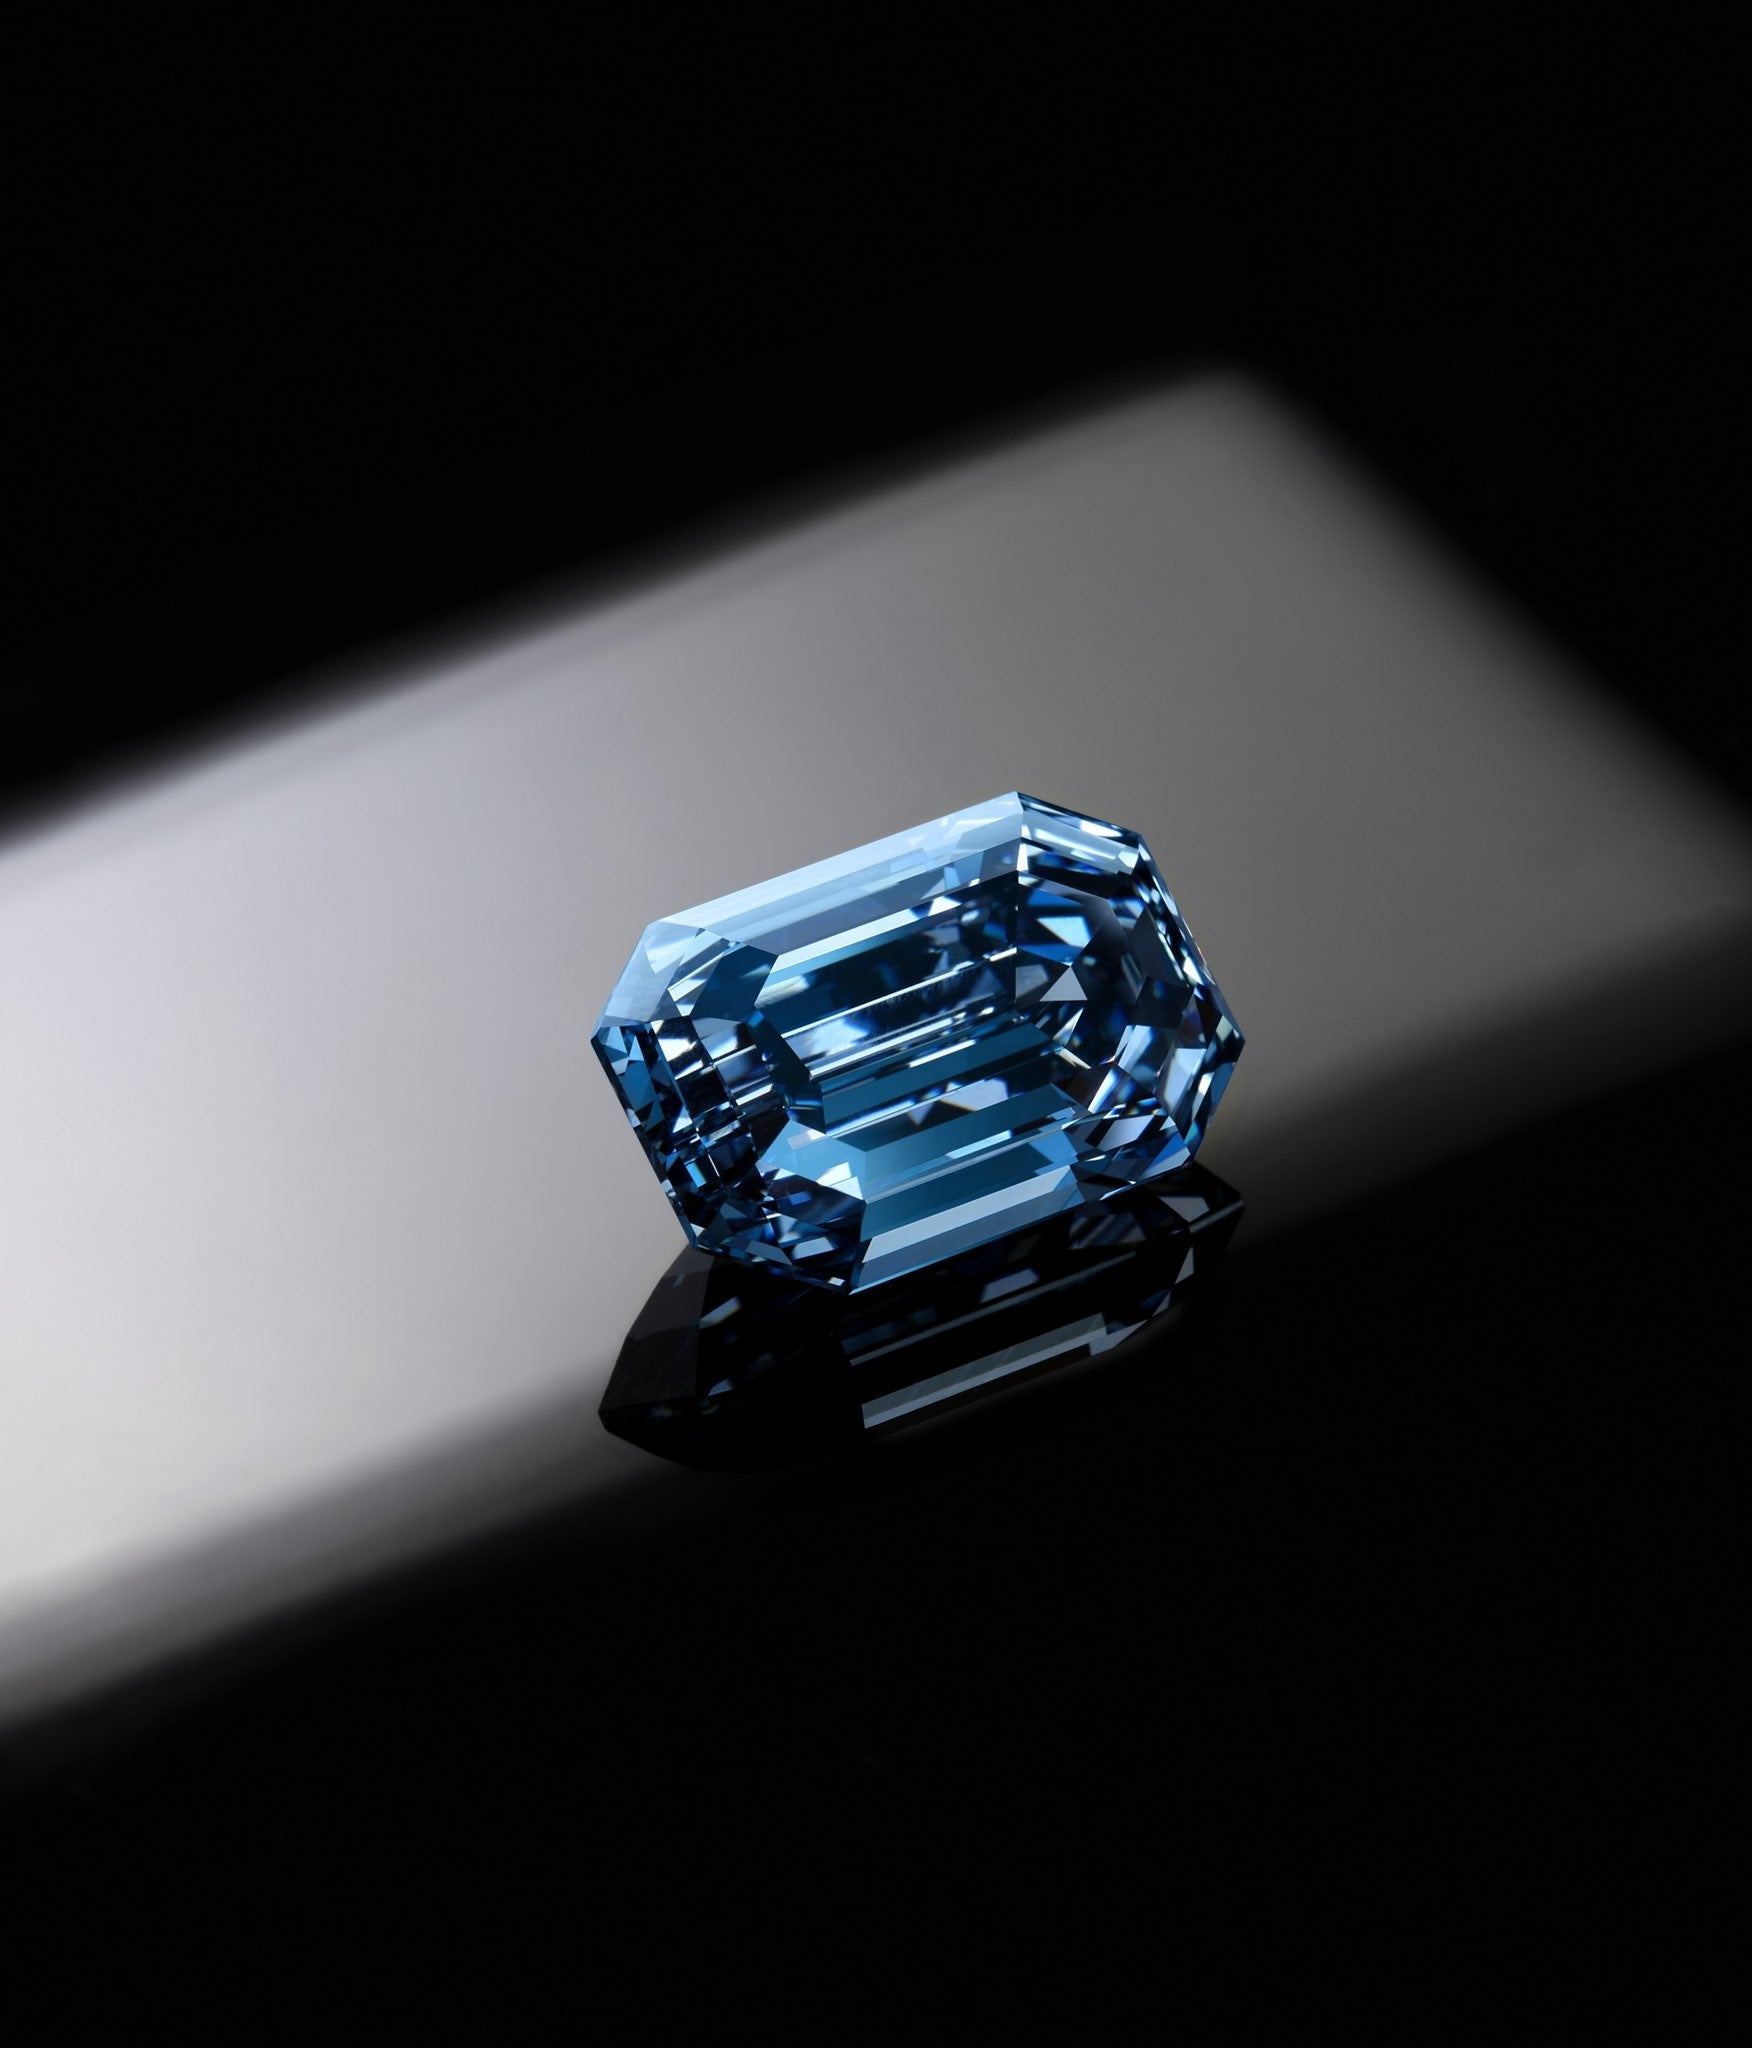 Record Blue Diamond To Be Auctioned. "It's a perfect masterpiece!" - DSF Antique Jewelry